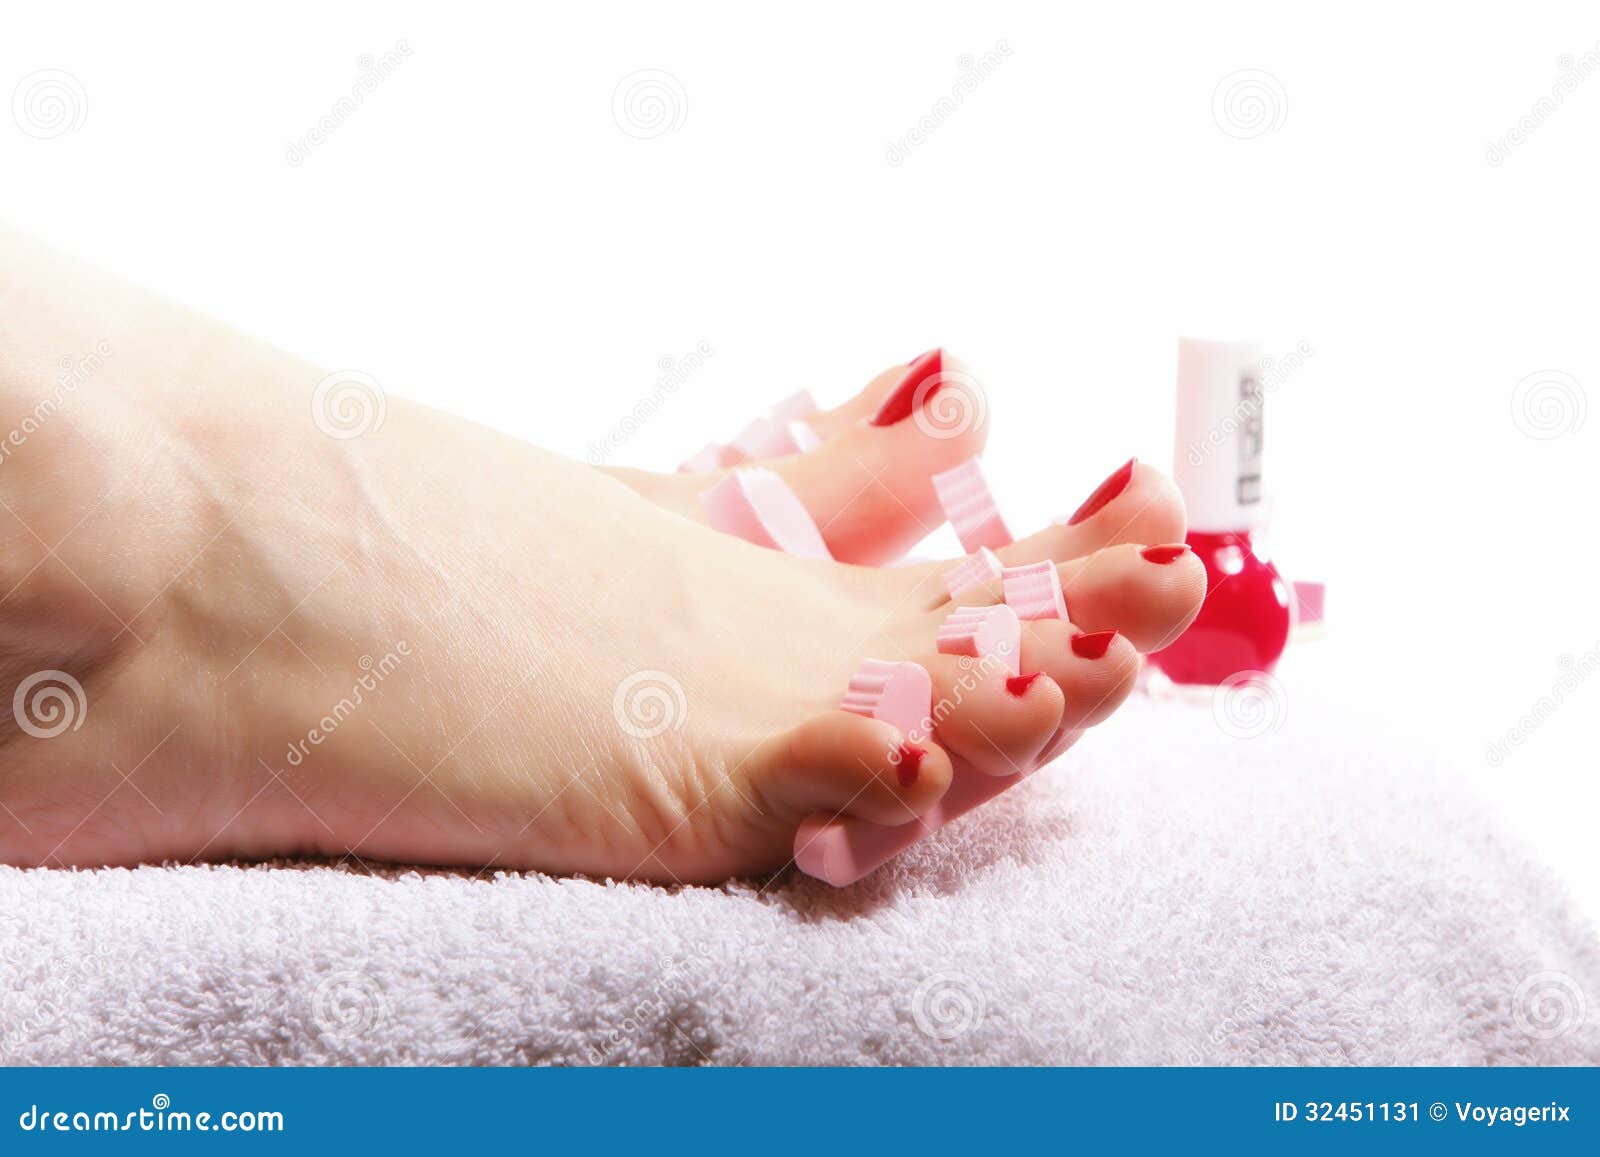 Foot Pedicure Applying Red Toenails On White Stock Image - Image of ...